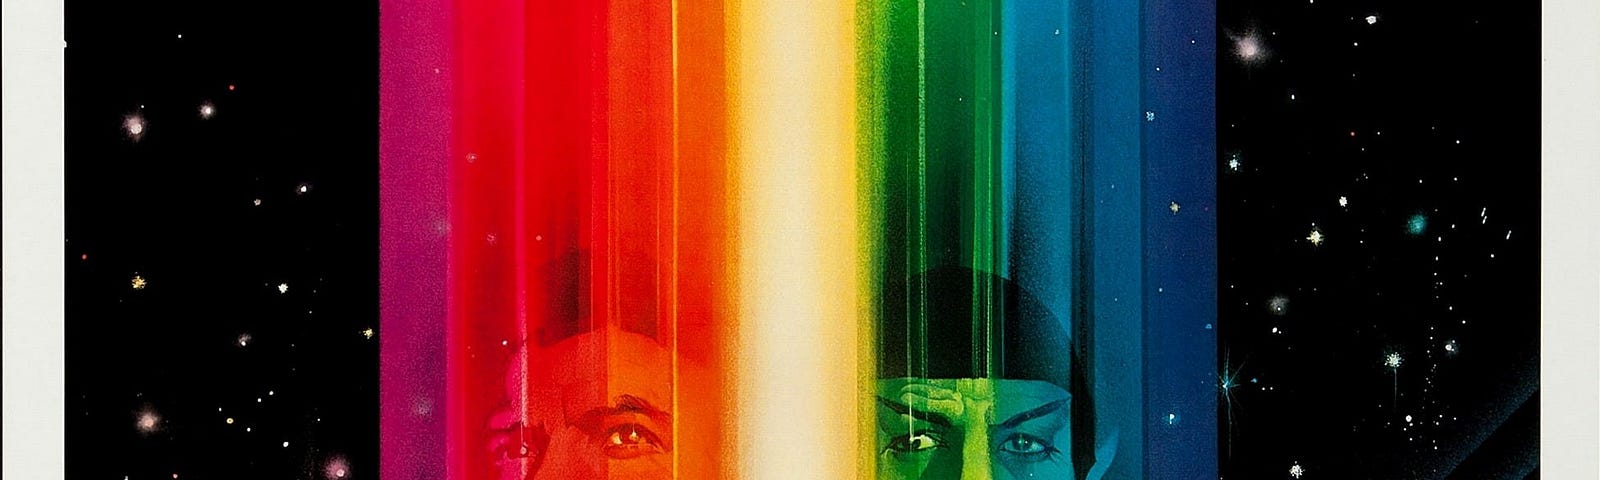 The theatrical poster is a vivid rainbow beam, set against a backdrop of stars. Behind the rainbow we can see the likenesses of Kirk, Ilia and Spock. Smaller, underneath and in-front is the USS Enterprise.